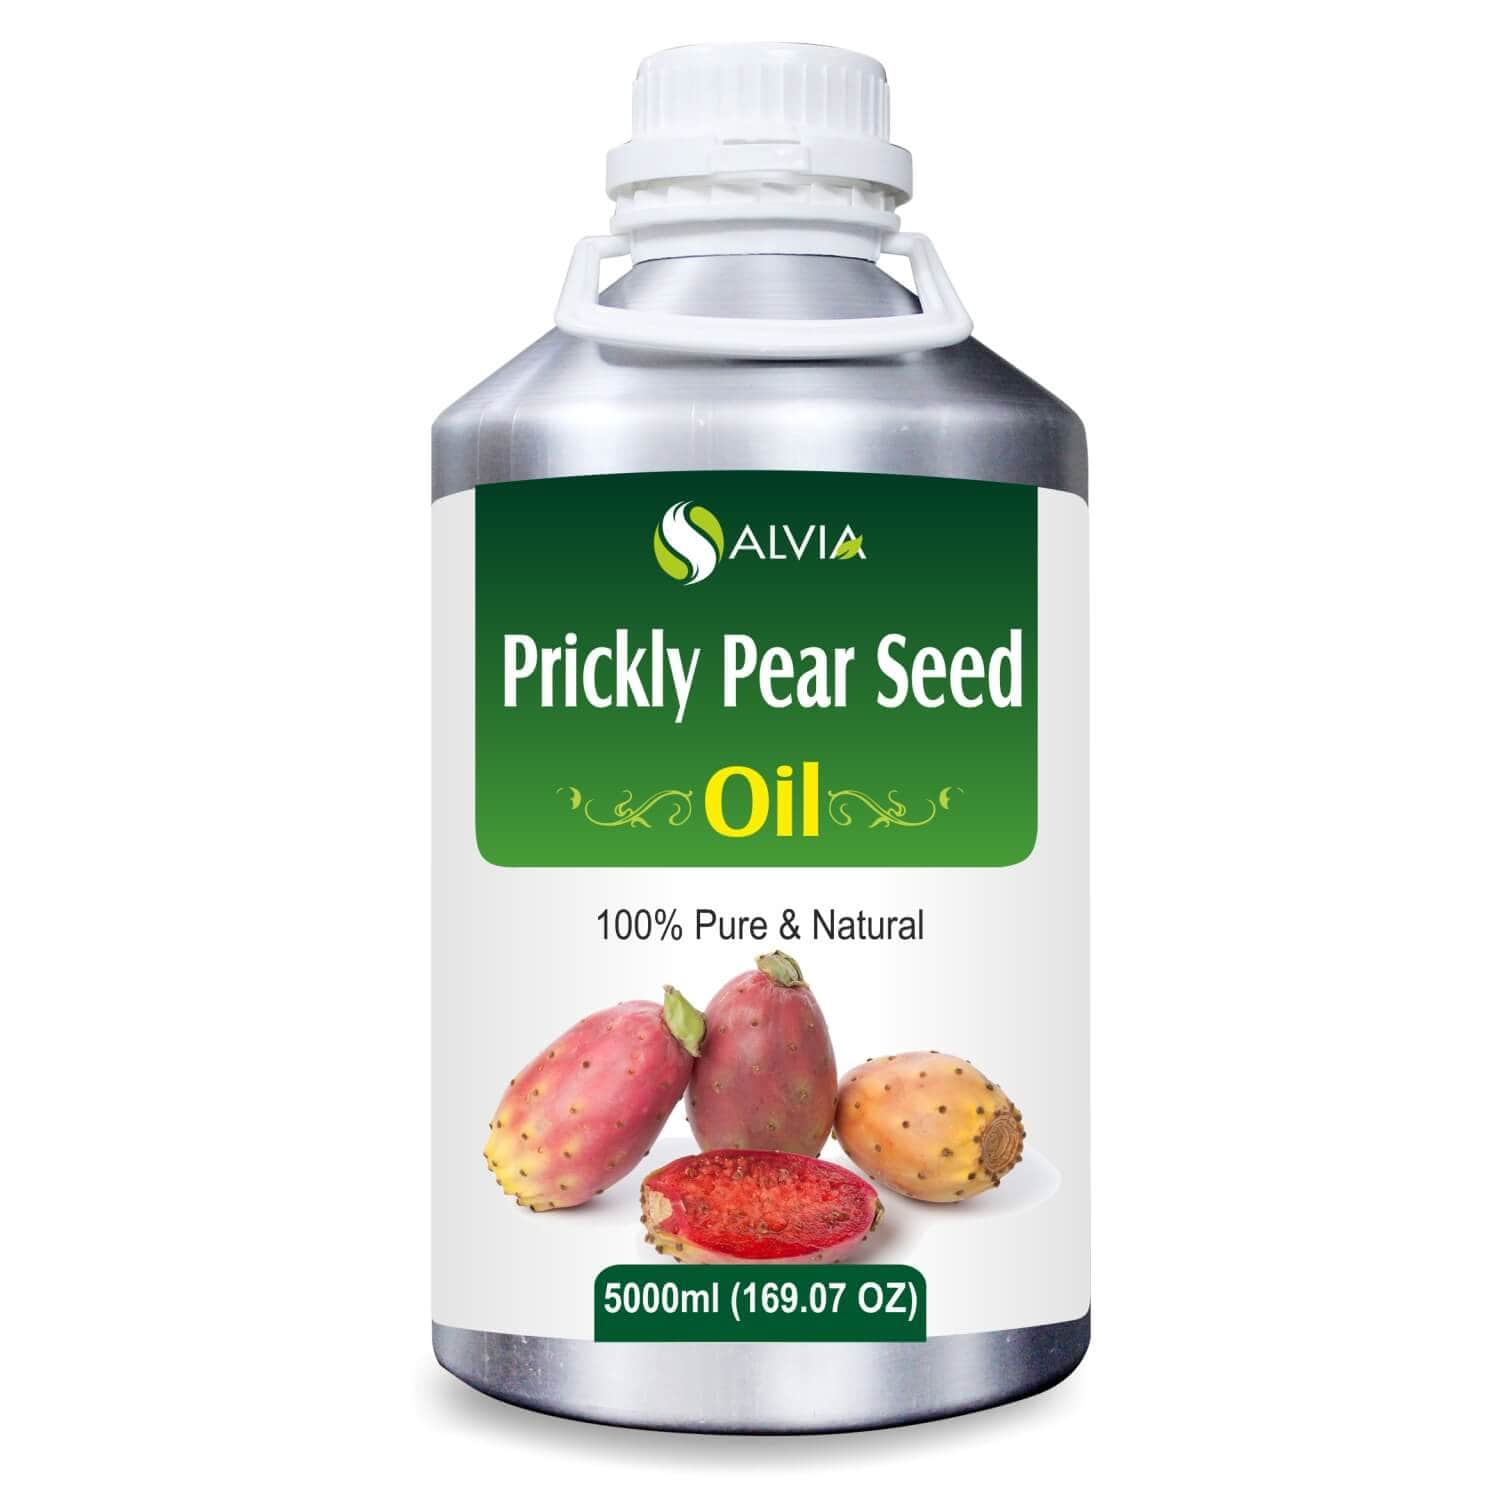 Salvia Natural Carrier Oils 5000ml Prickly Pear Seed Oil (Opuntia Ficus-Indica) Natural Pure Carrier Oil